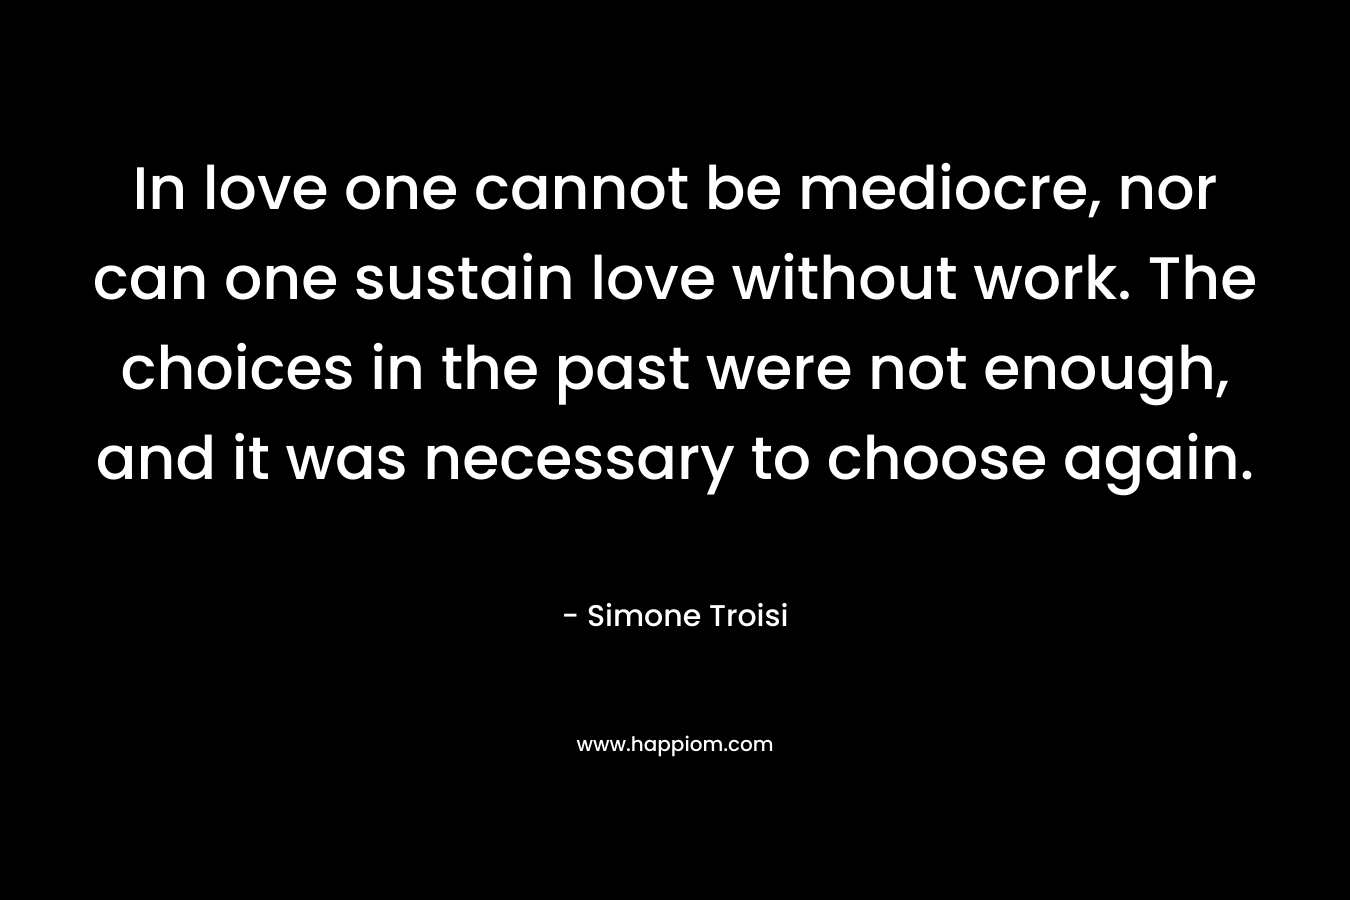 In love one cannot be mediocre, nor can one sustain love without work. The choices in the past were not enough, and it was necessary to choose again.